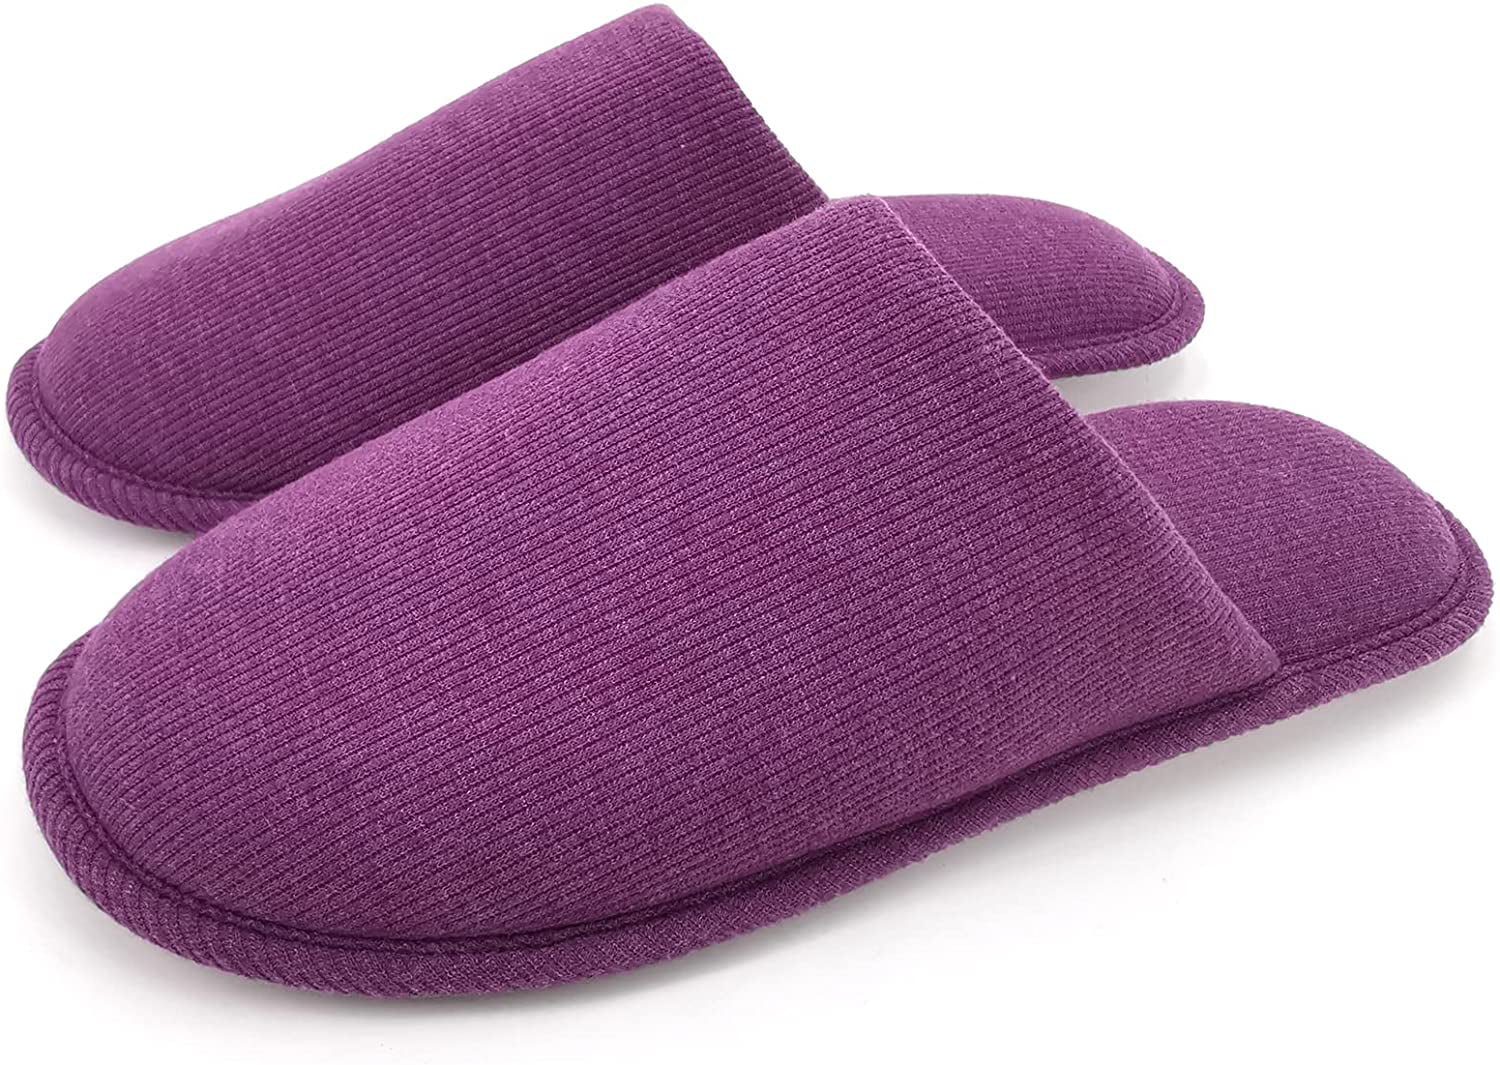 ofoot Womens Cotton Non Slip House Slippers,Cozy Memory Foam Washable for Summer Bedroom,Rubber Sole 